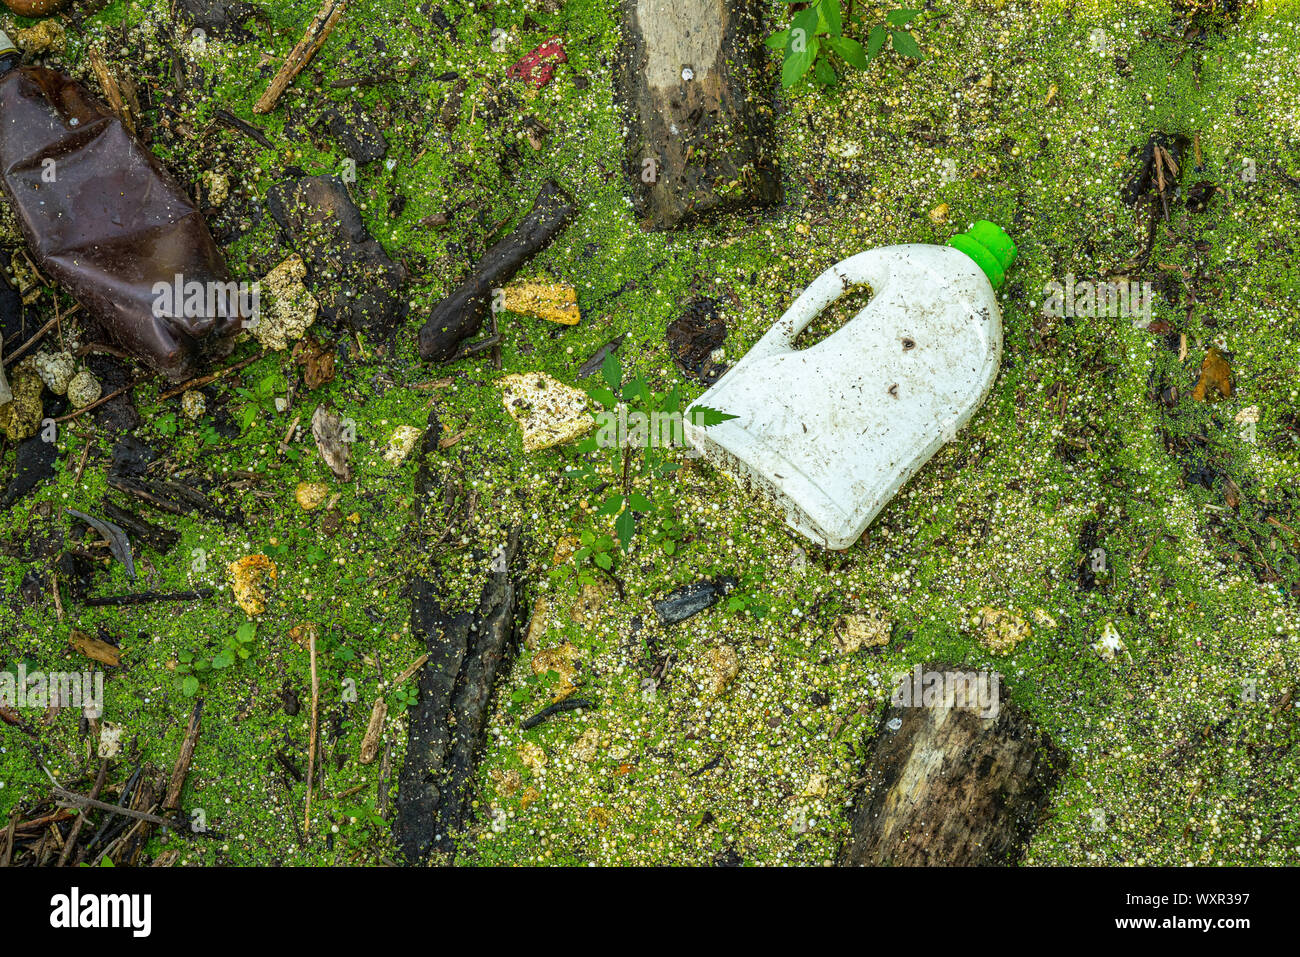 plastic, bottles, polystyrene and micro plastics in river water Stock Photo